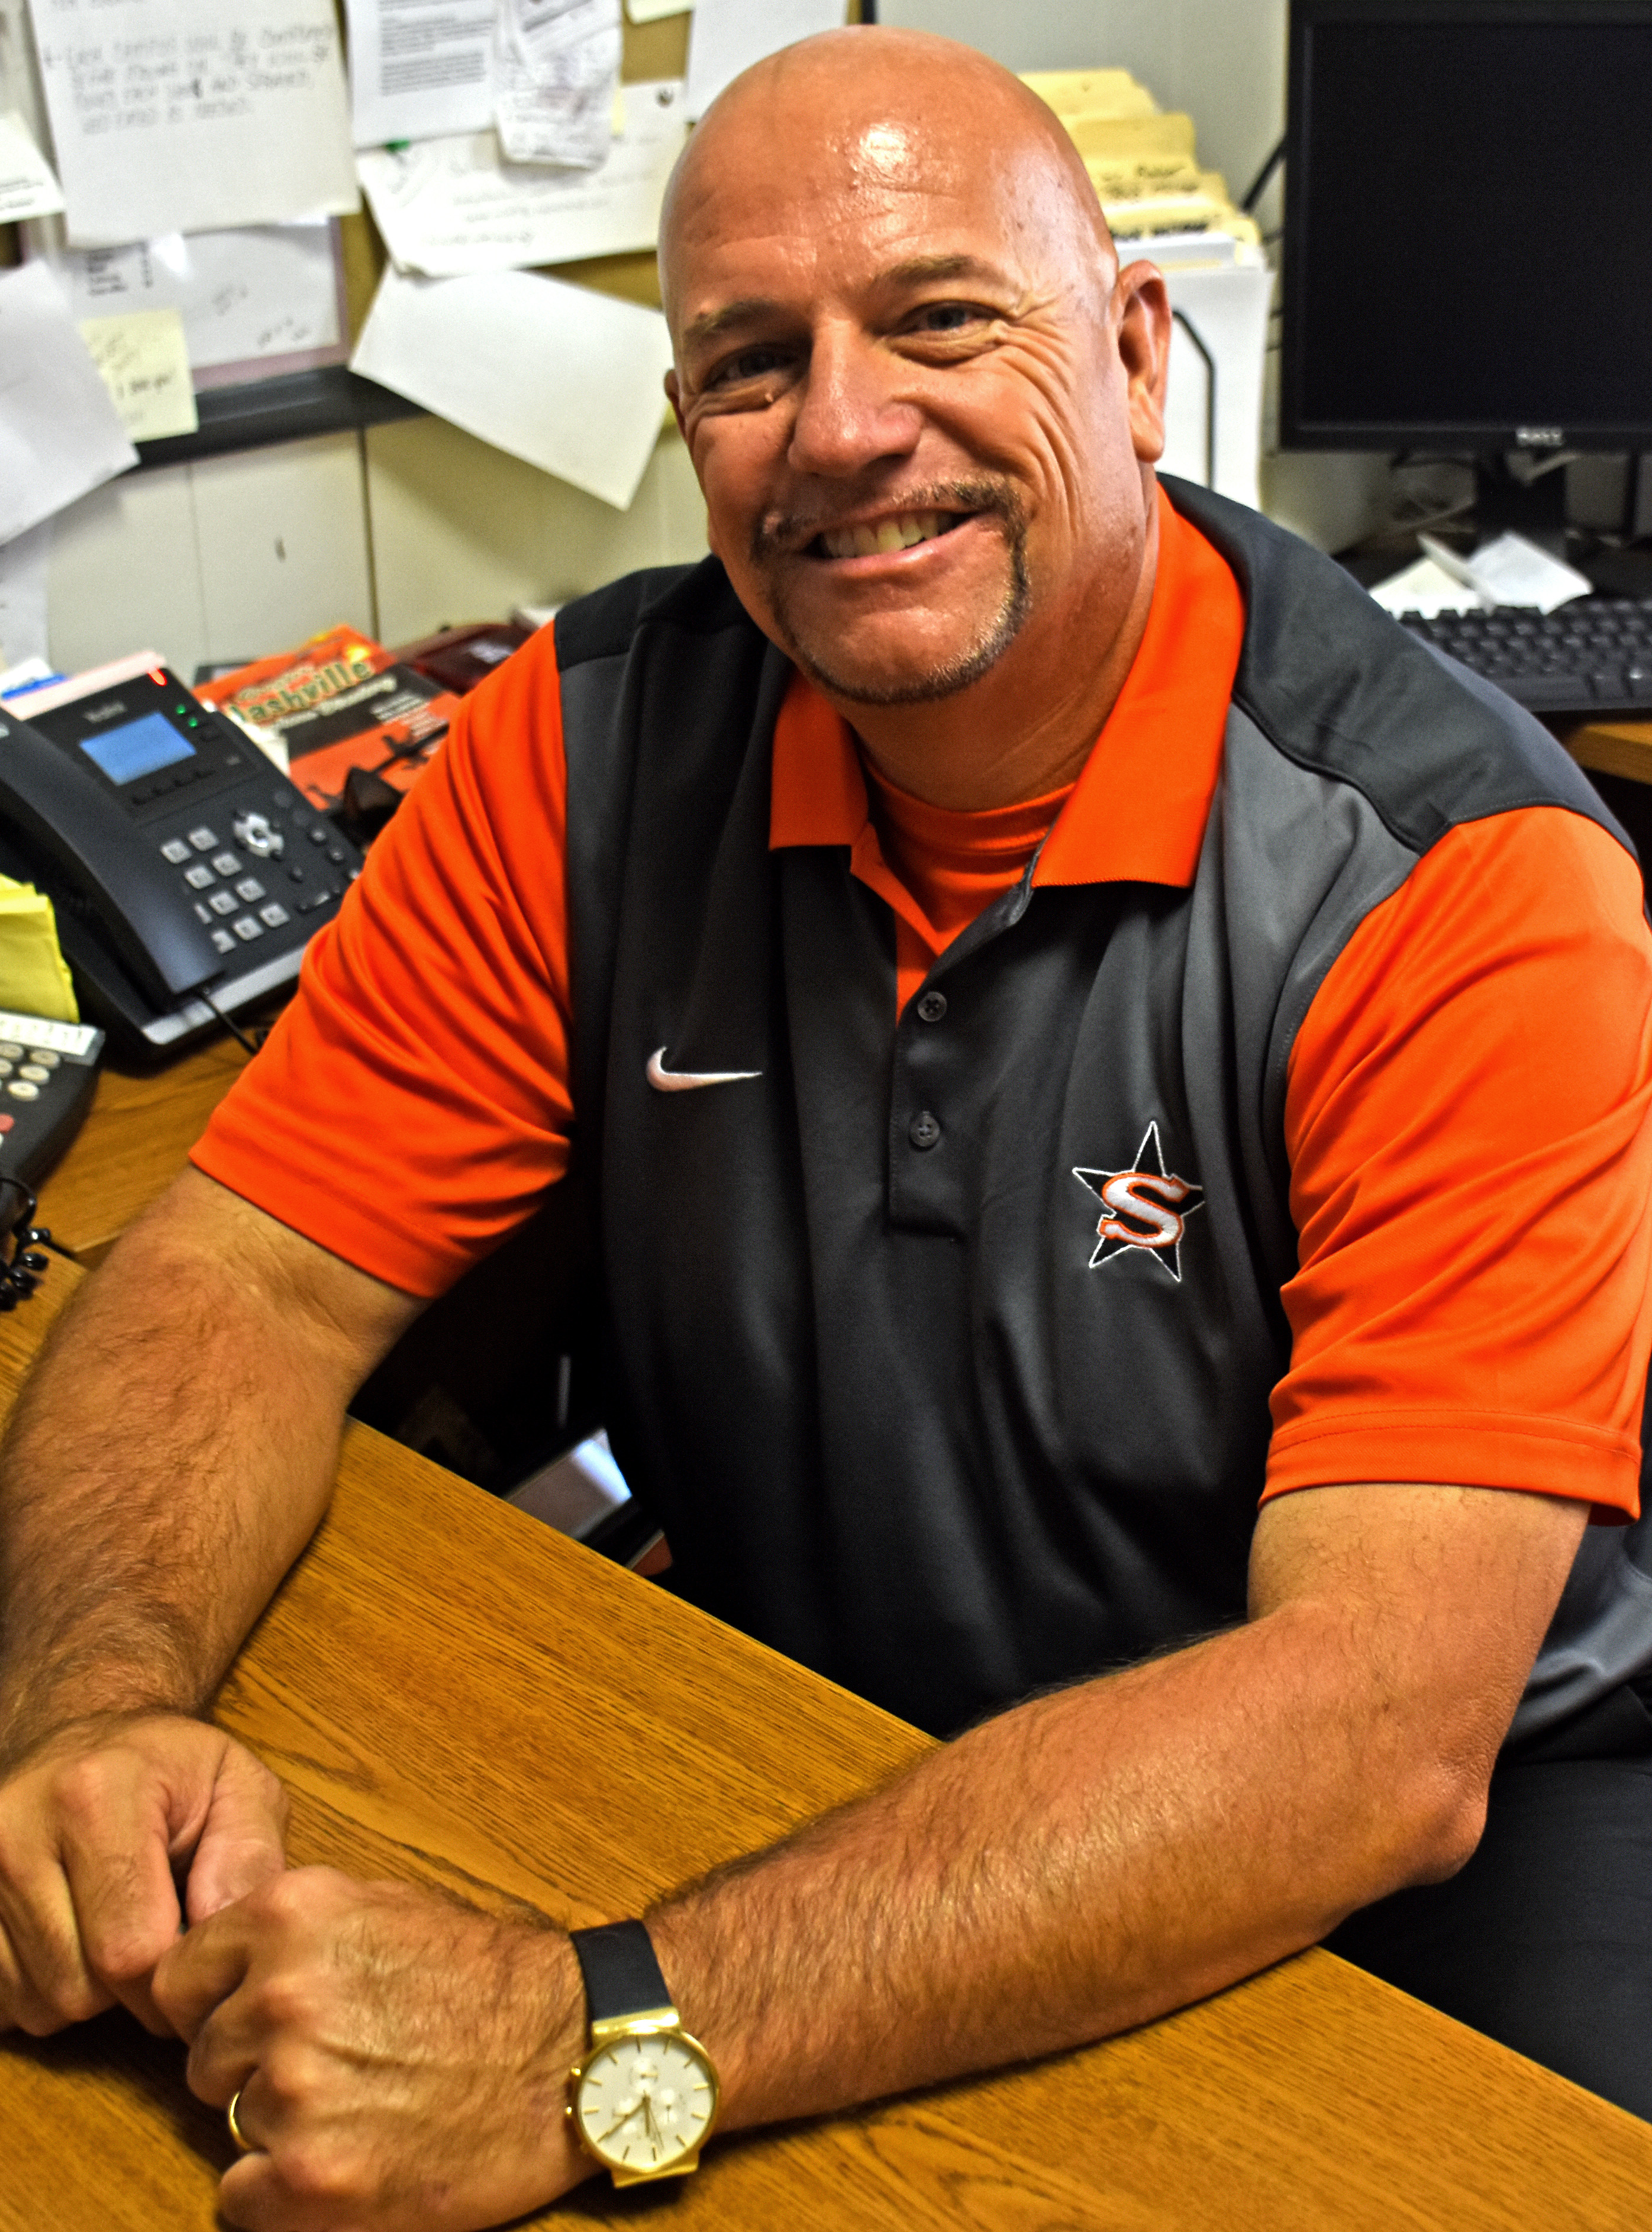 Director of athletics, transportation, and facilities and maintenance James "Bunch" Nichols